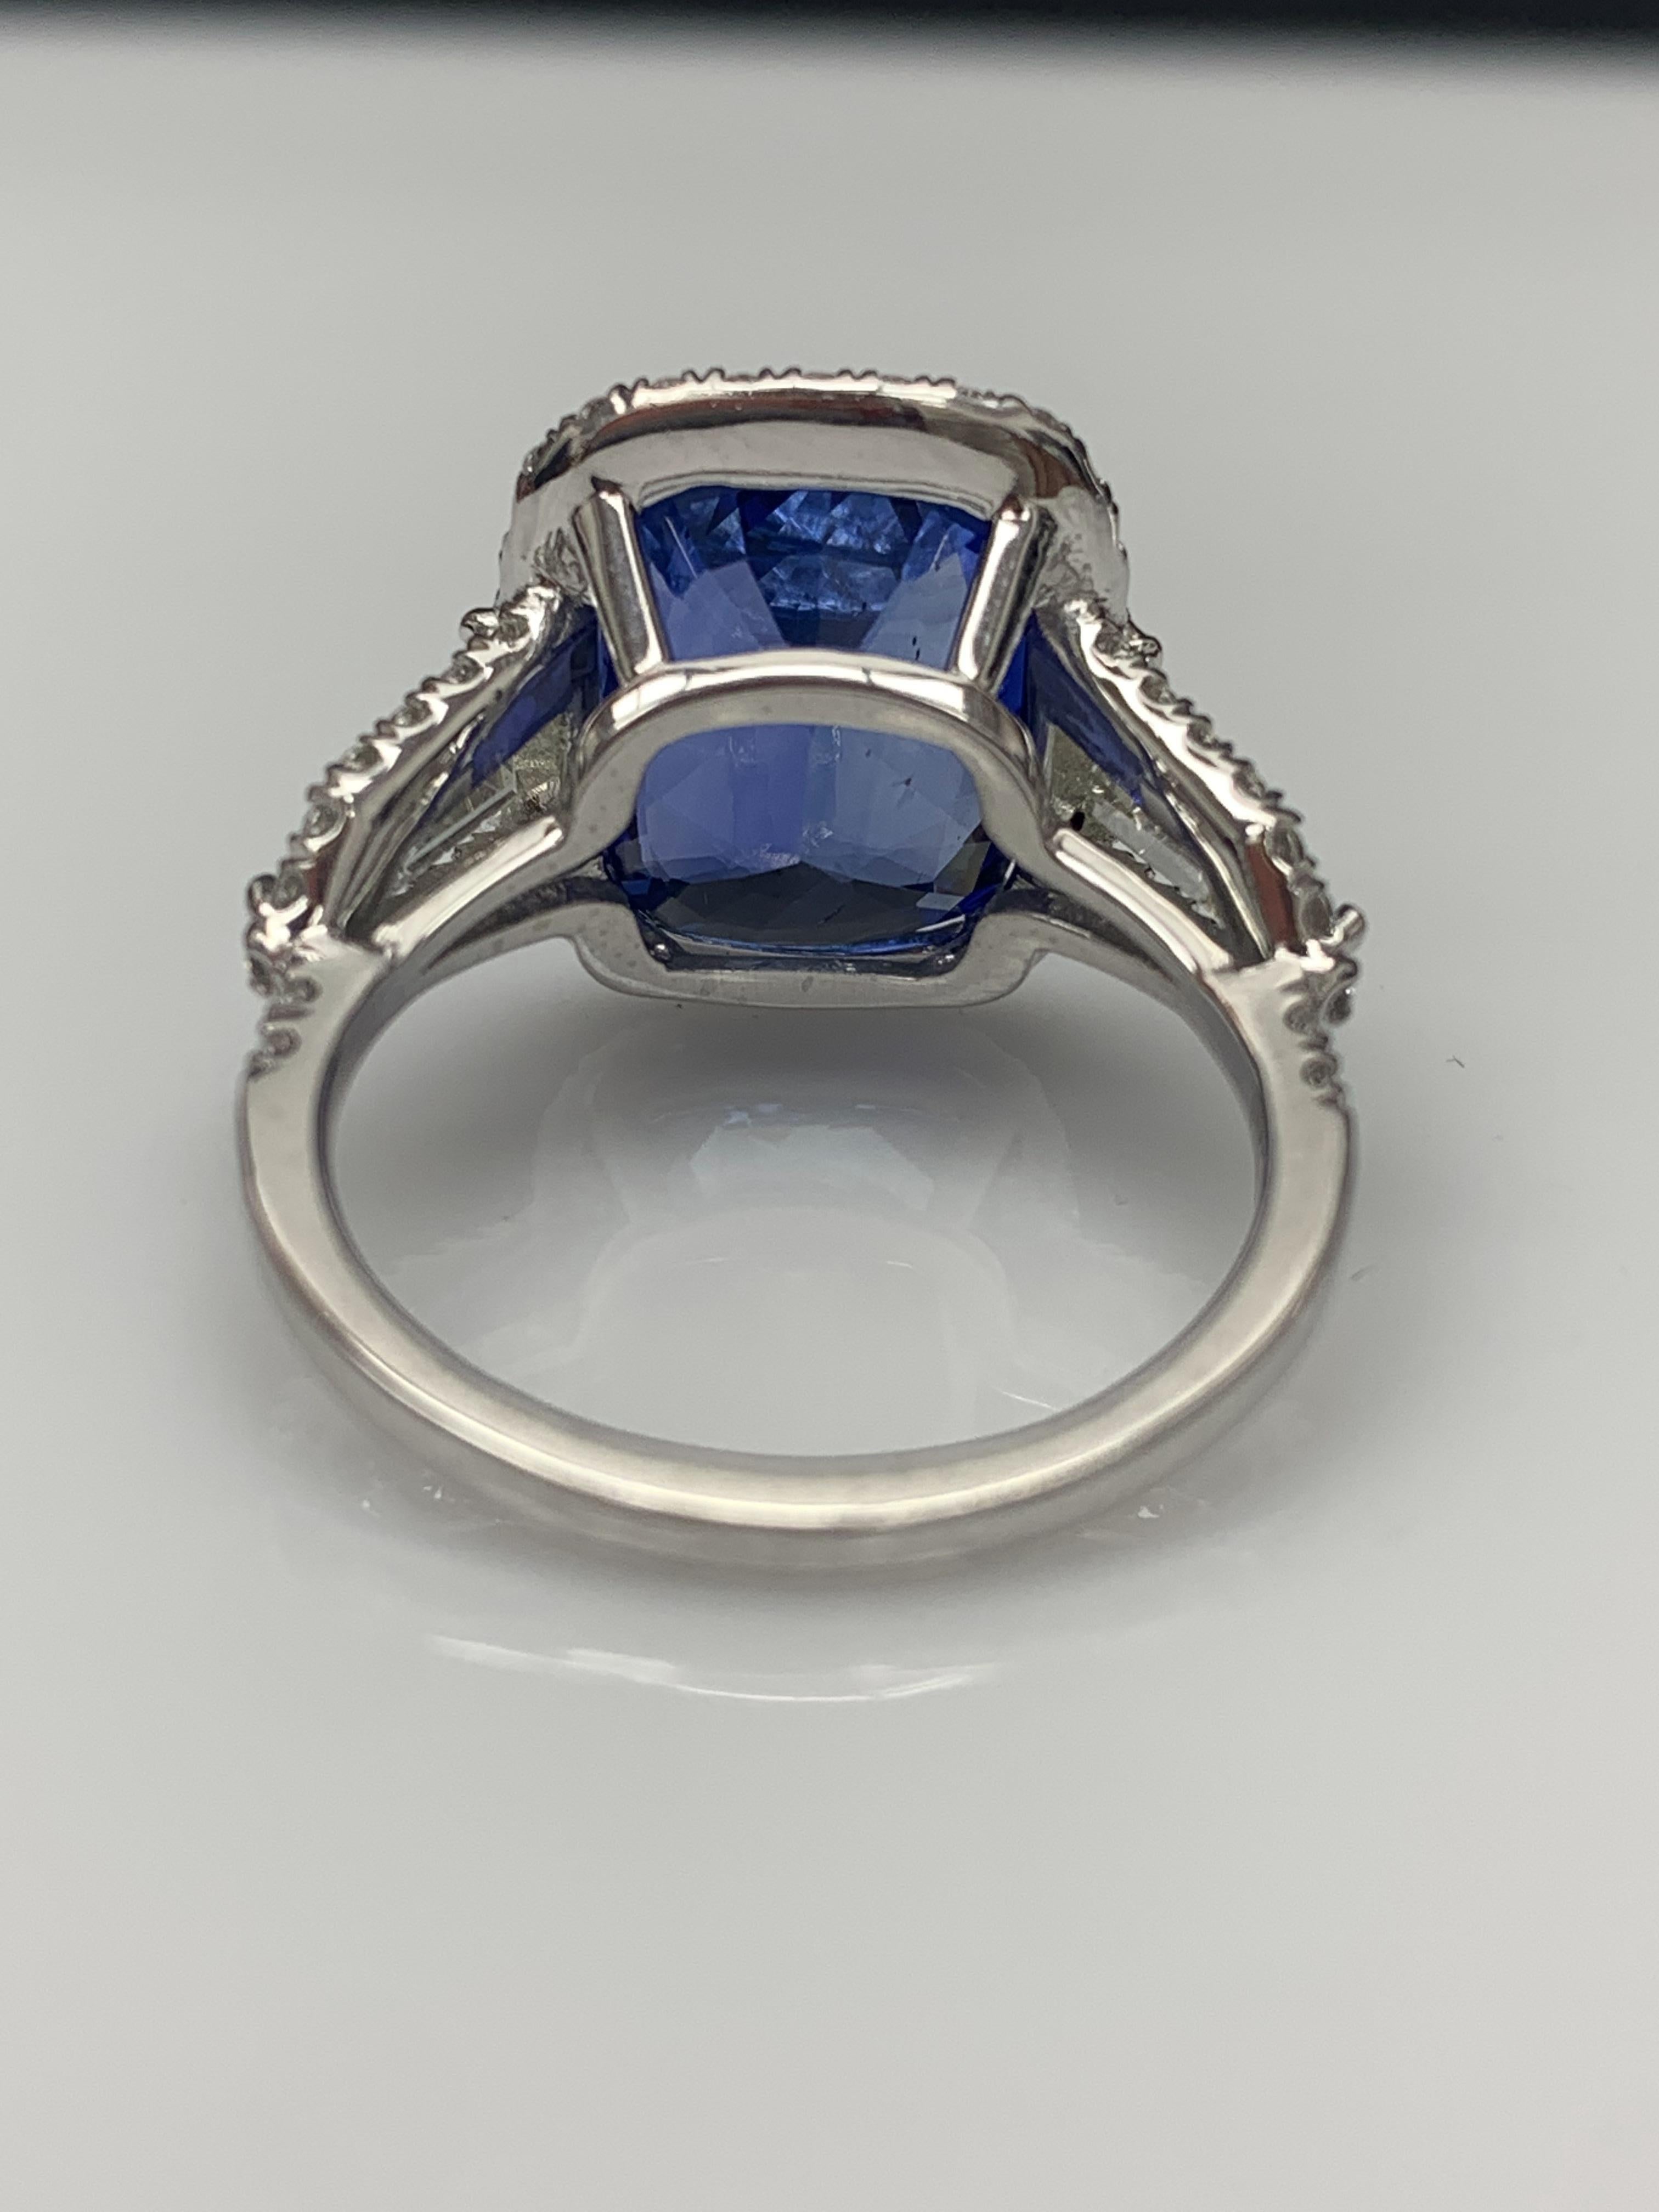 7.51 Carat Cushion Cut Sapphire and Diamond Engagement Ring in Platinum For Sale 2